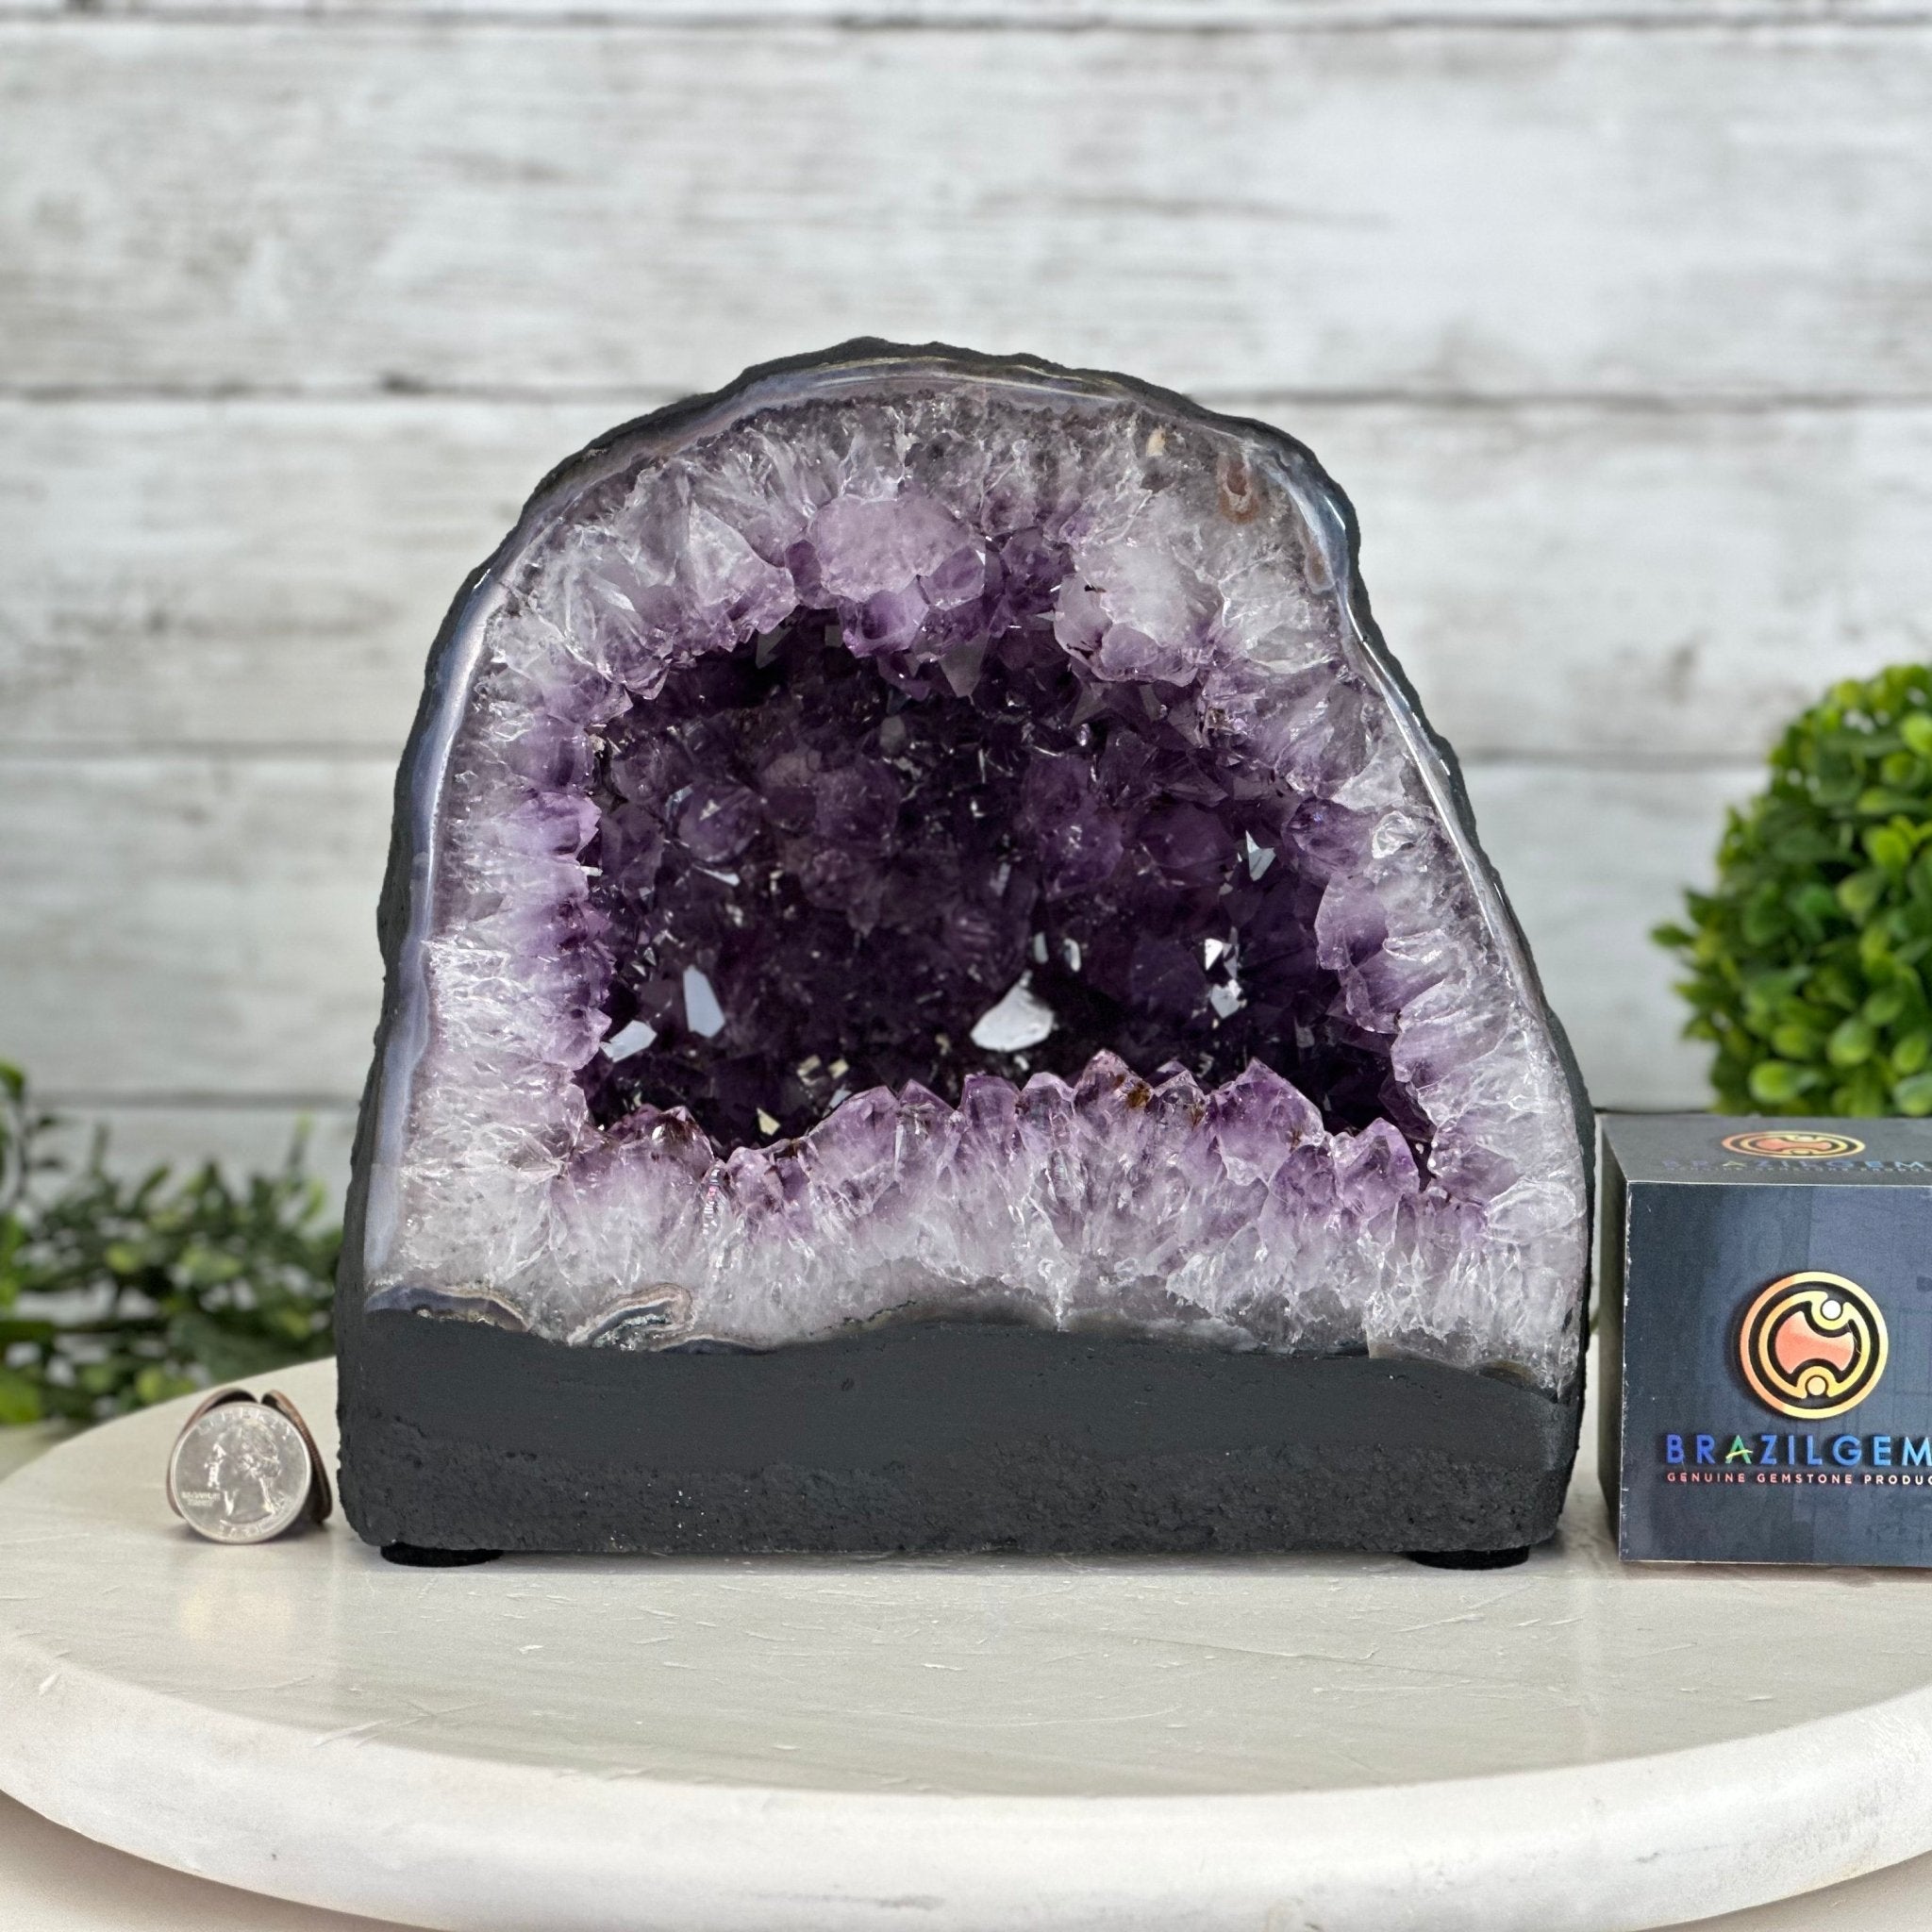 Quality Brazilian Amethyst Cathedral, 12.8 lbs & 8.1" Tall, #5601 - 1361 - Brazil GemsBrazil GemsQuality Brazilian Amethyst Cathedral, 12.8 lbs & 8.1" Tall, #5601 - 1361Cathedrals5601 - 1361